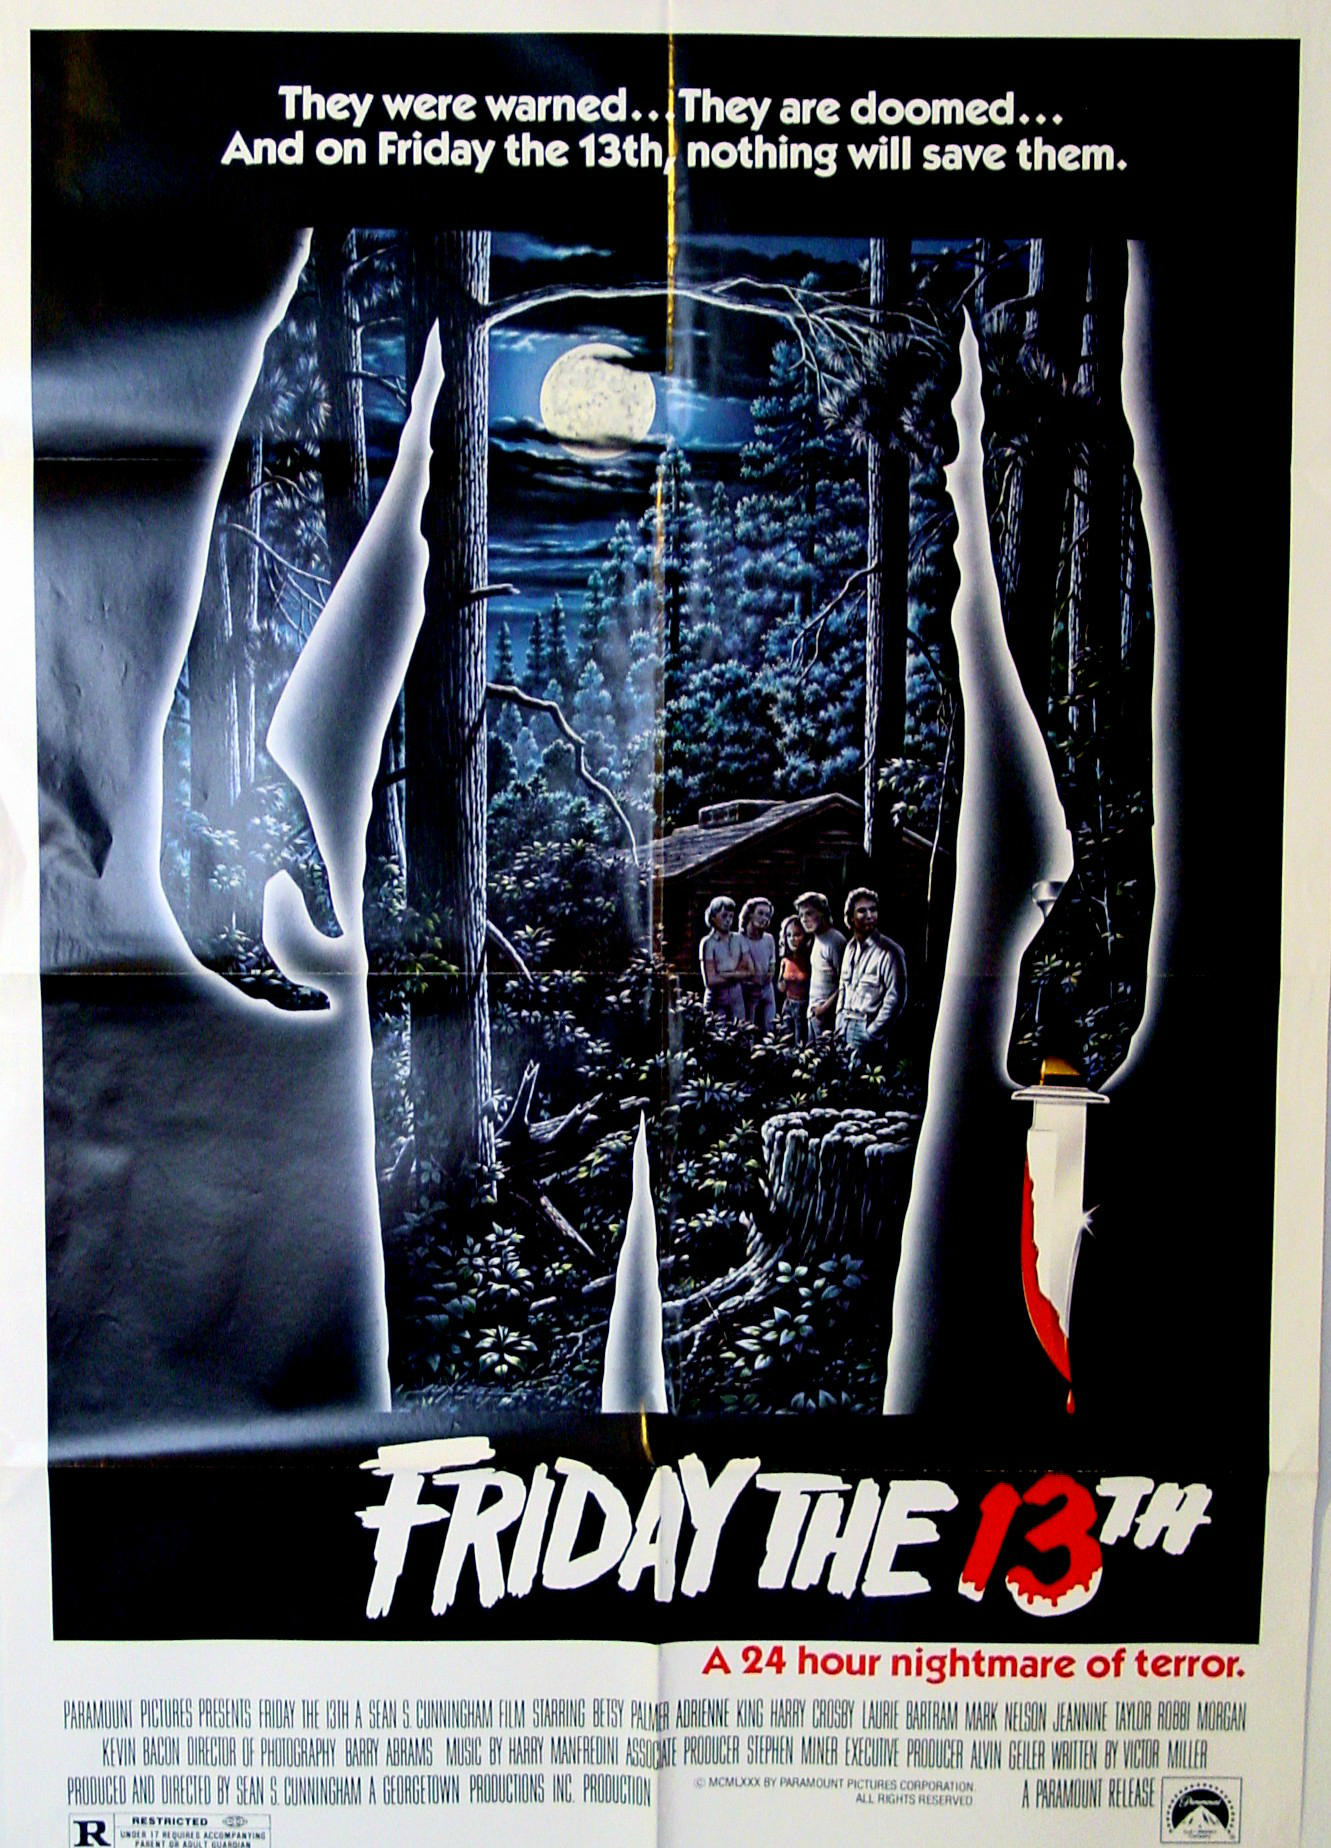 Friday the 13th (1980) - Movie Review / Film Essay